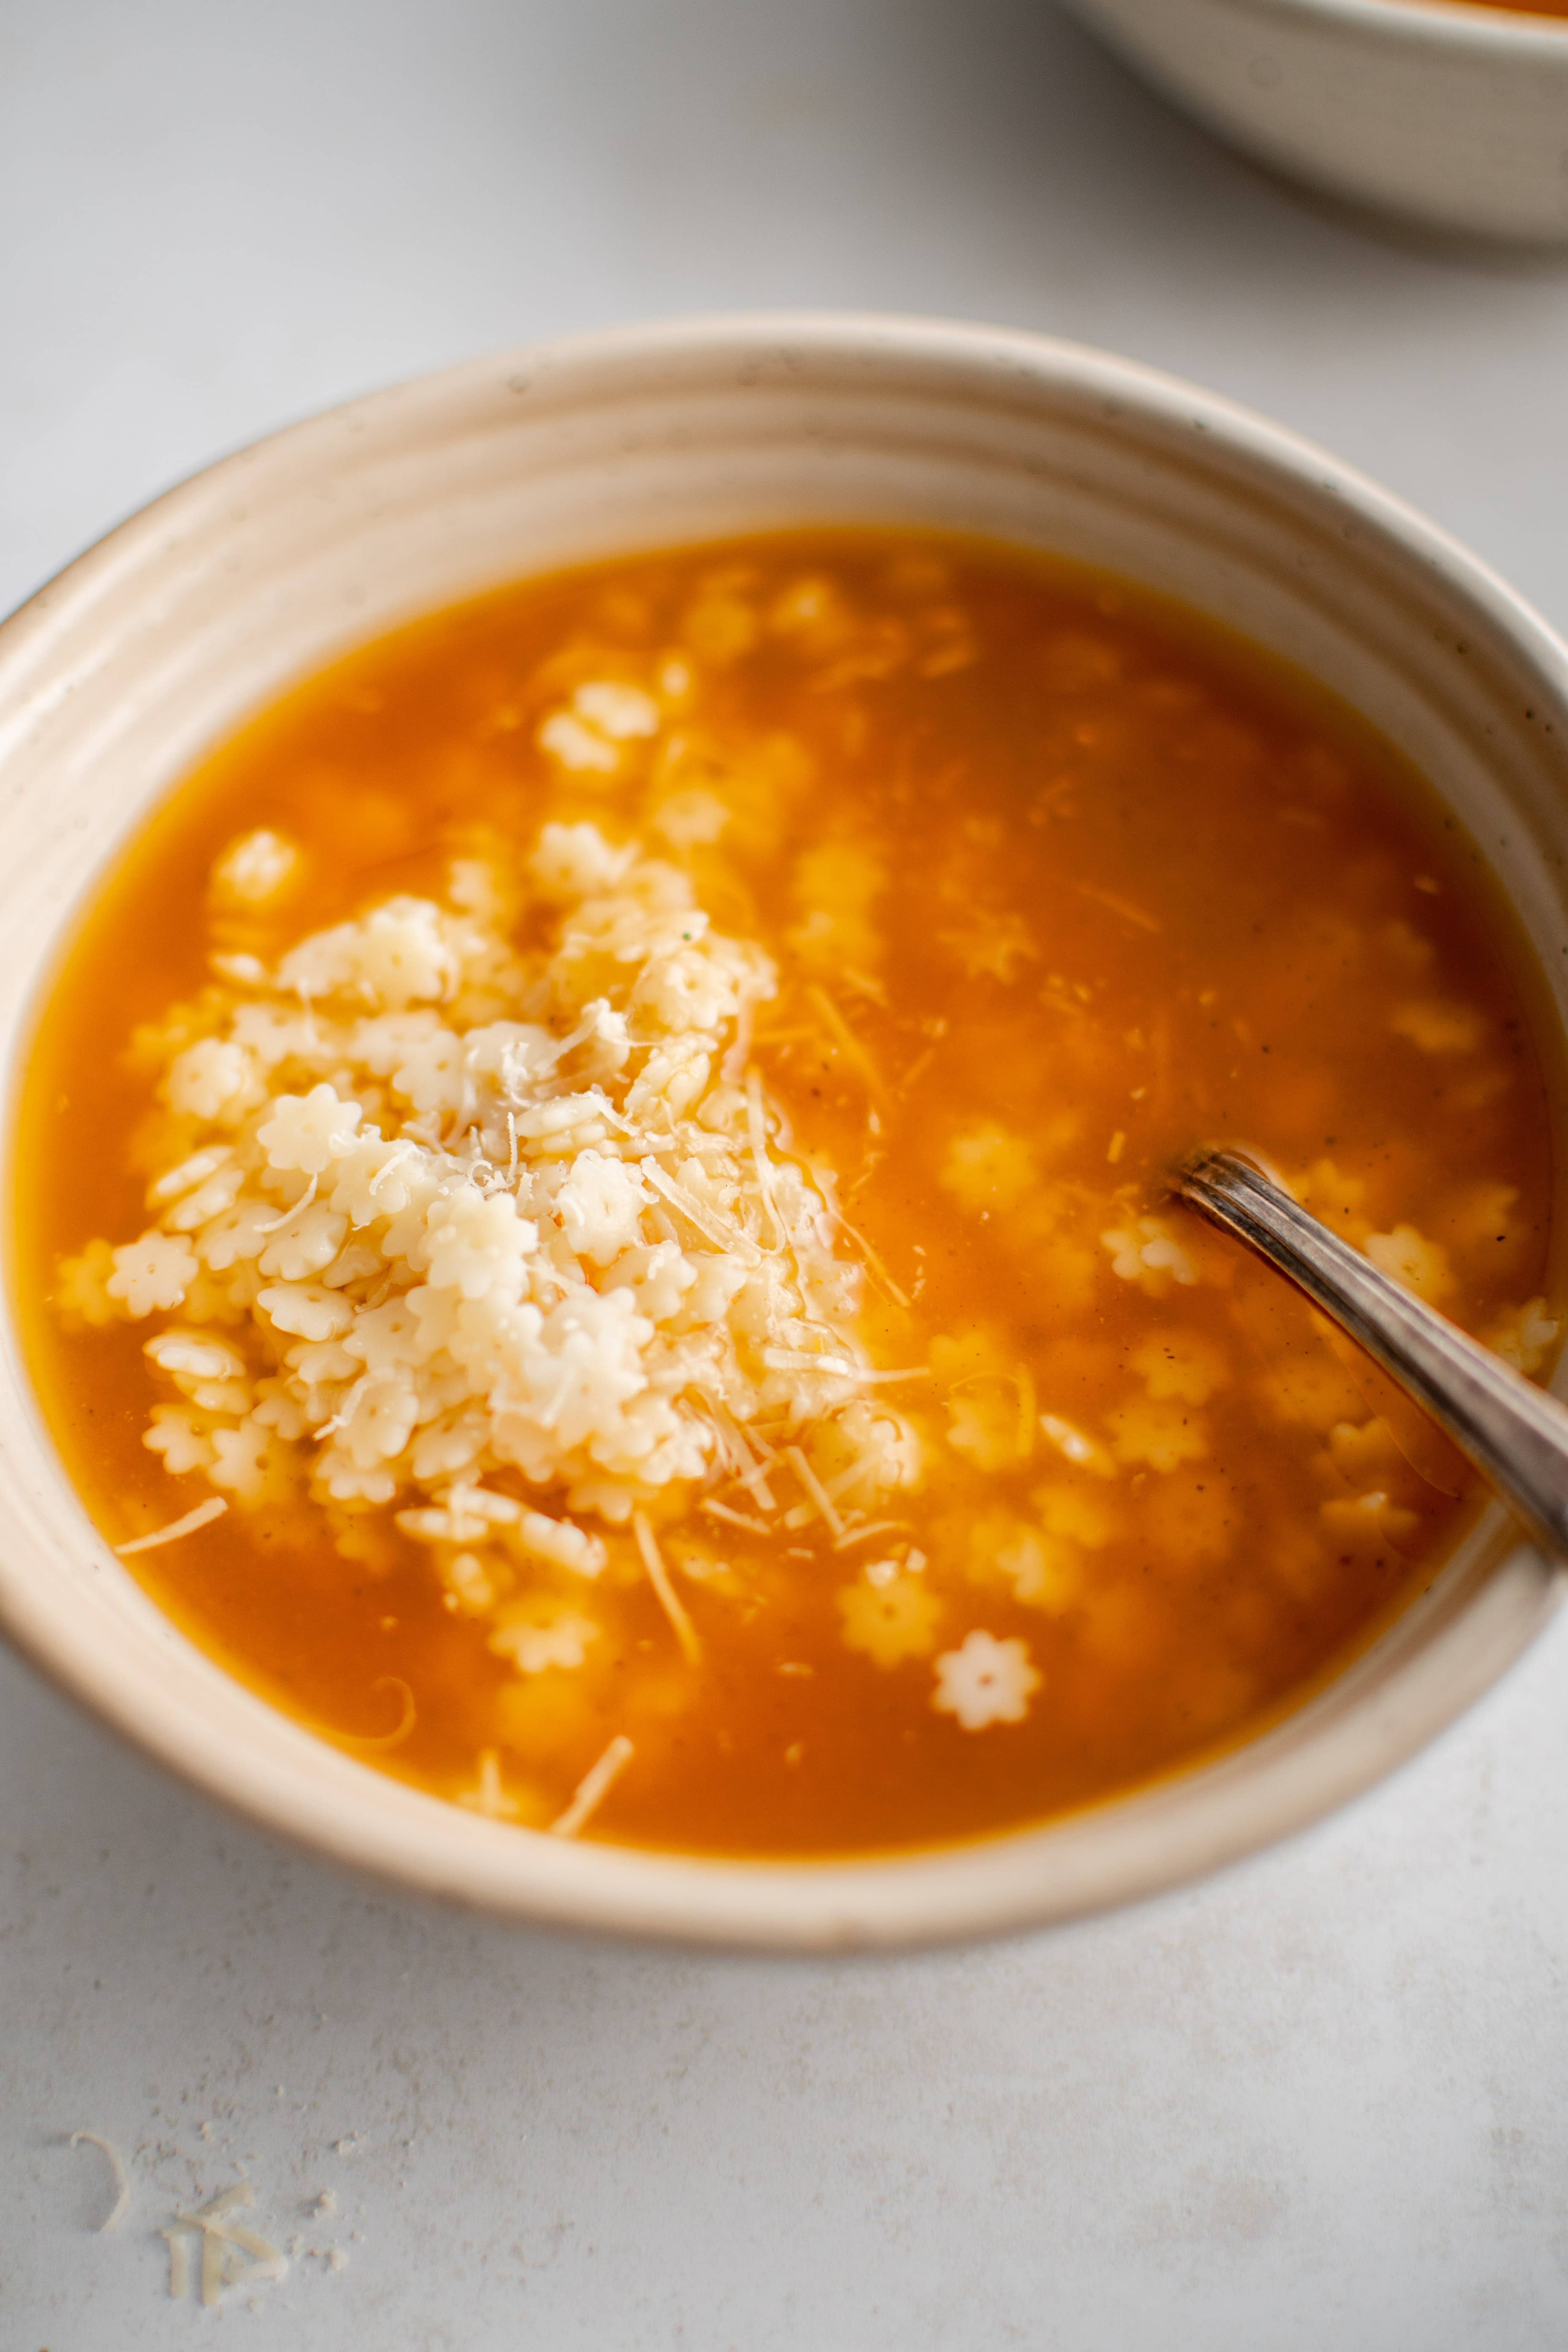 Beige colored soup bowl filled with pastina in a rich and comforting orange-colored vegetable chicken broth and garnished with freshly grated parmesan cheese.